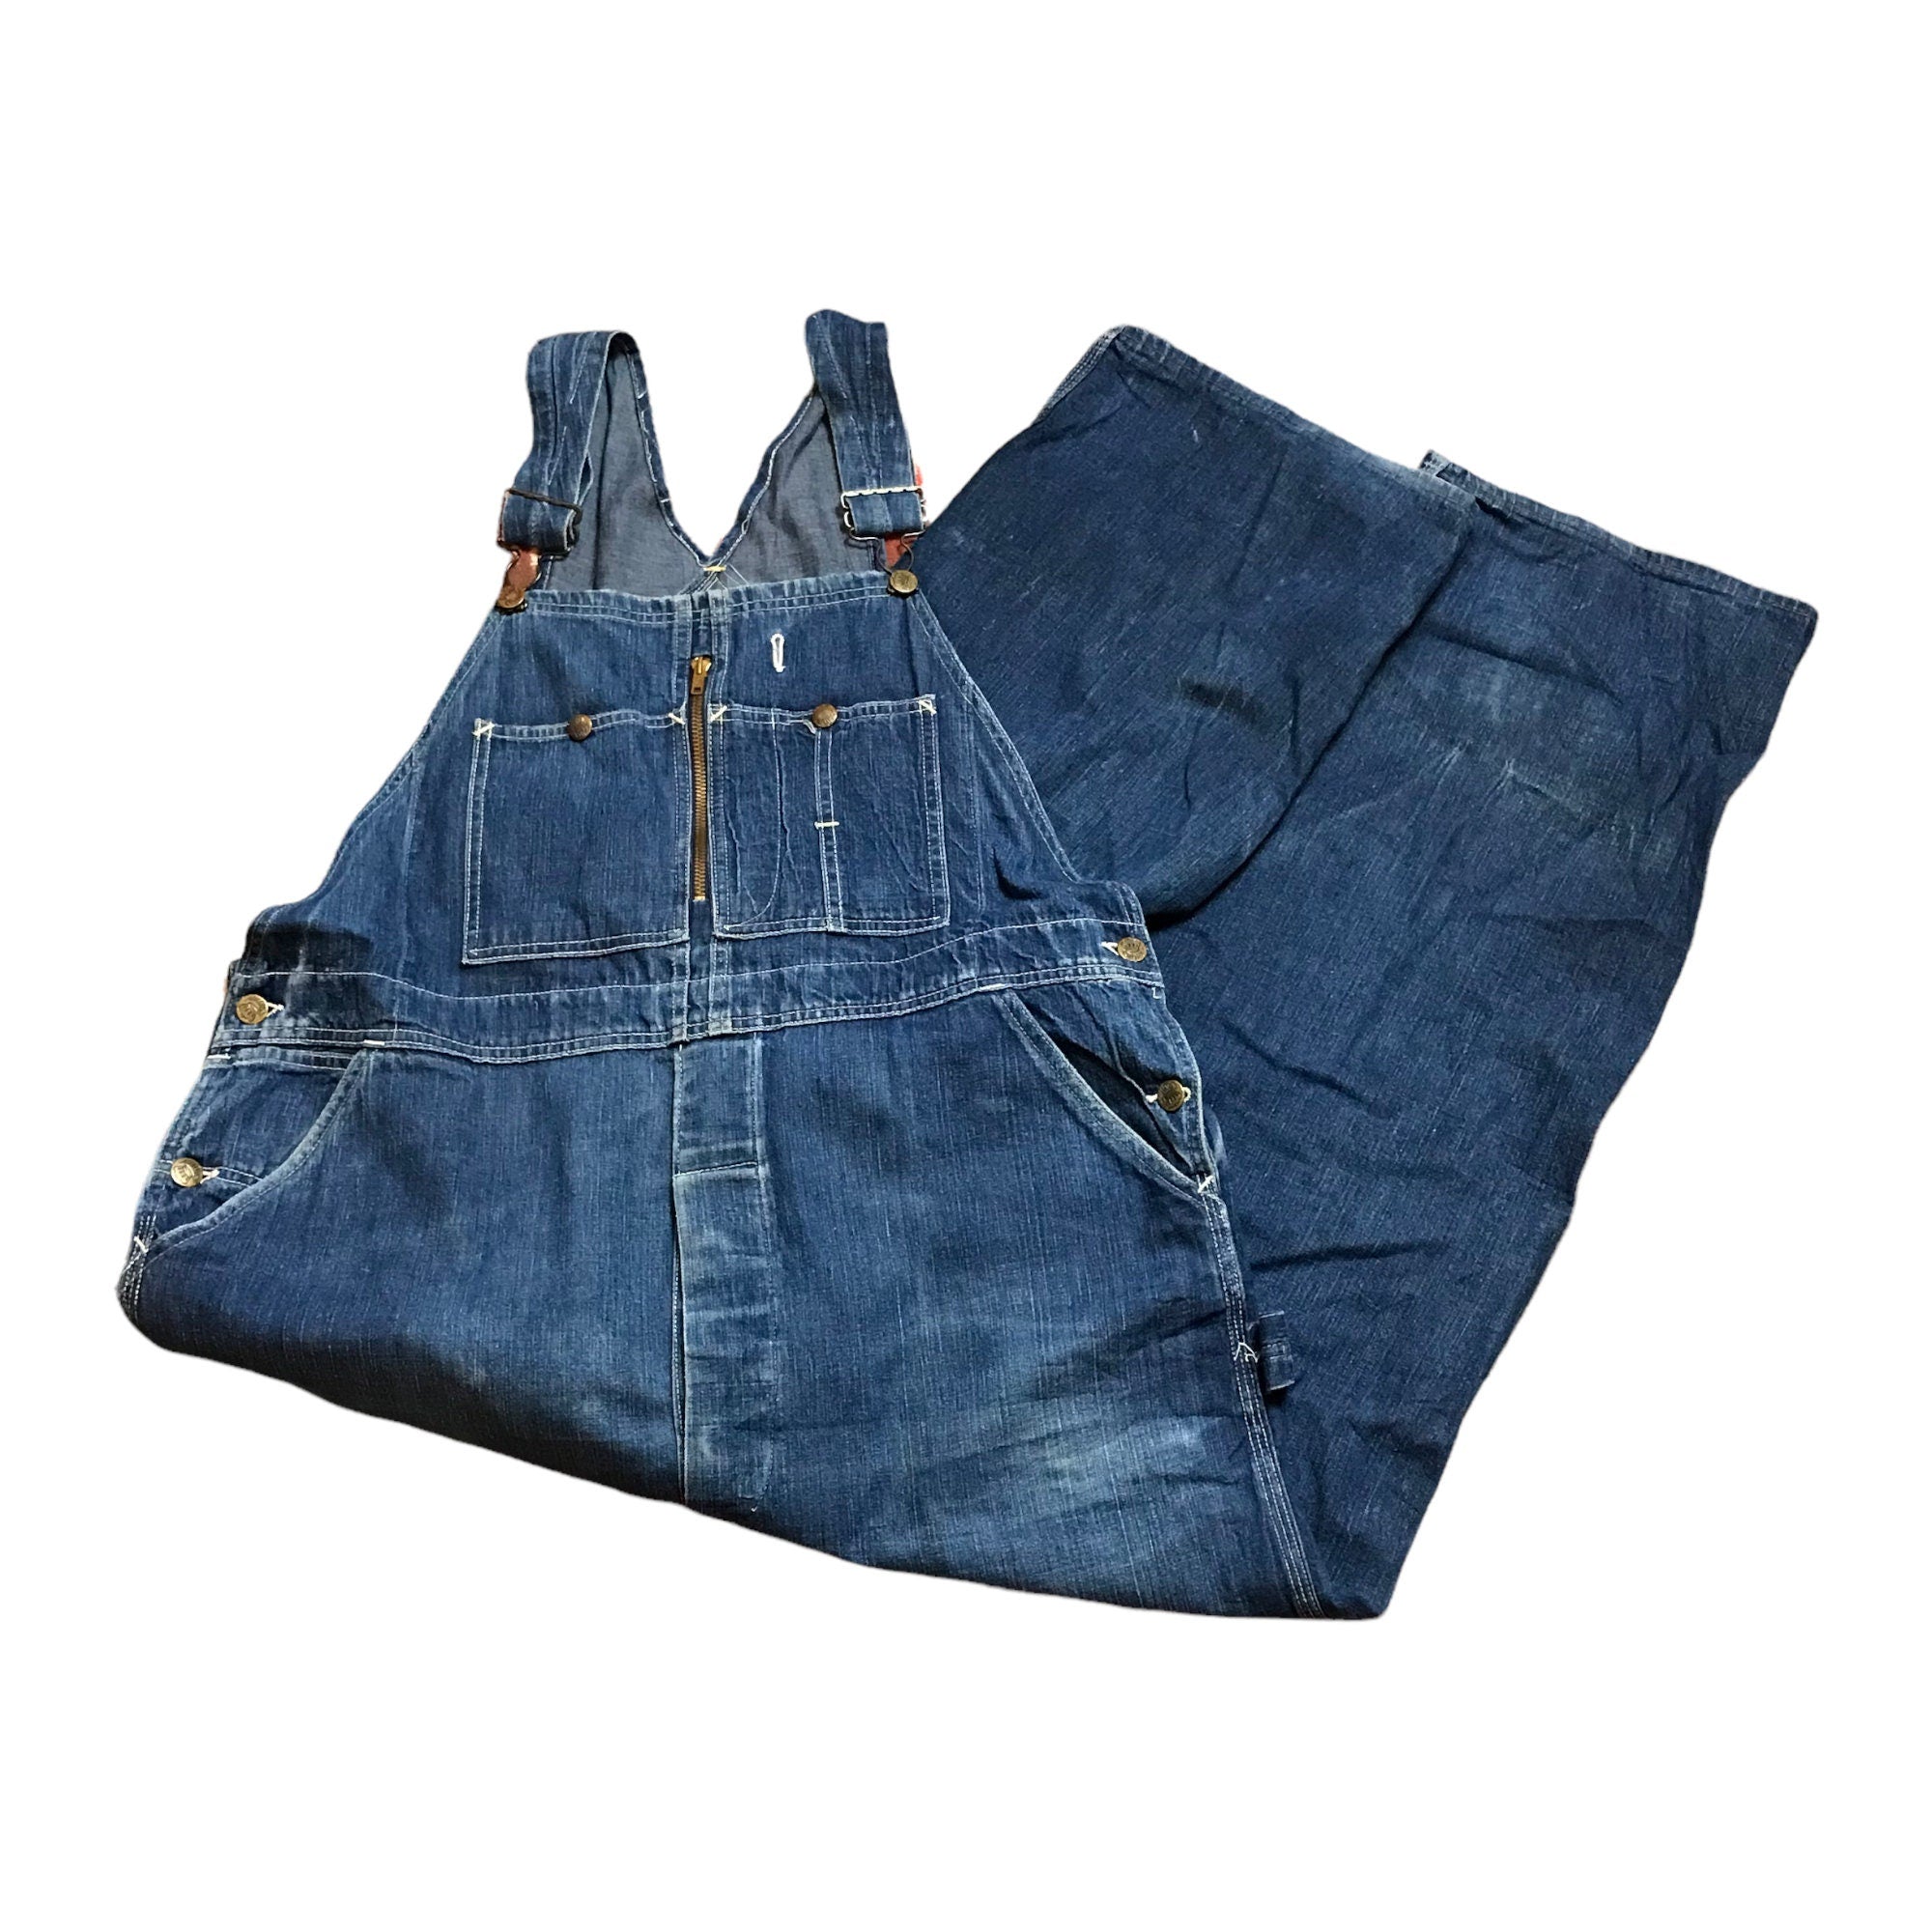 1950s Crown Overall Manufacturing Co. Denim Overalls Size 41x28